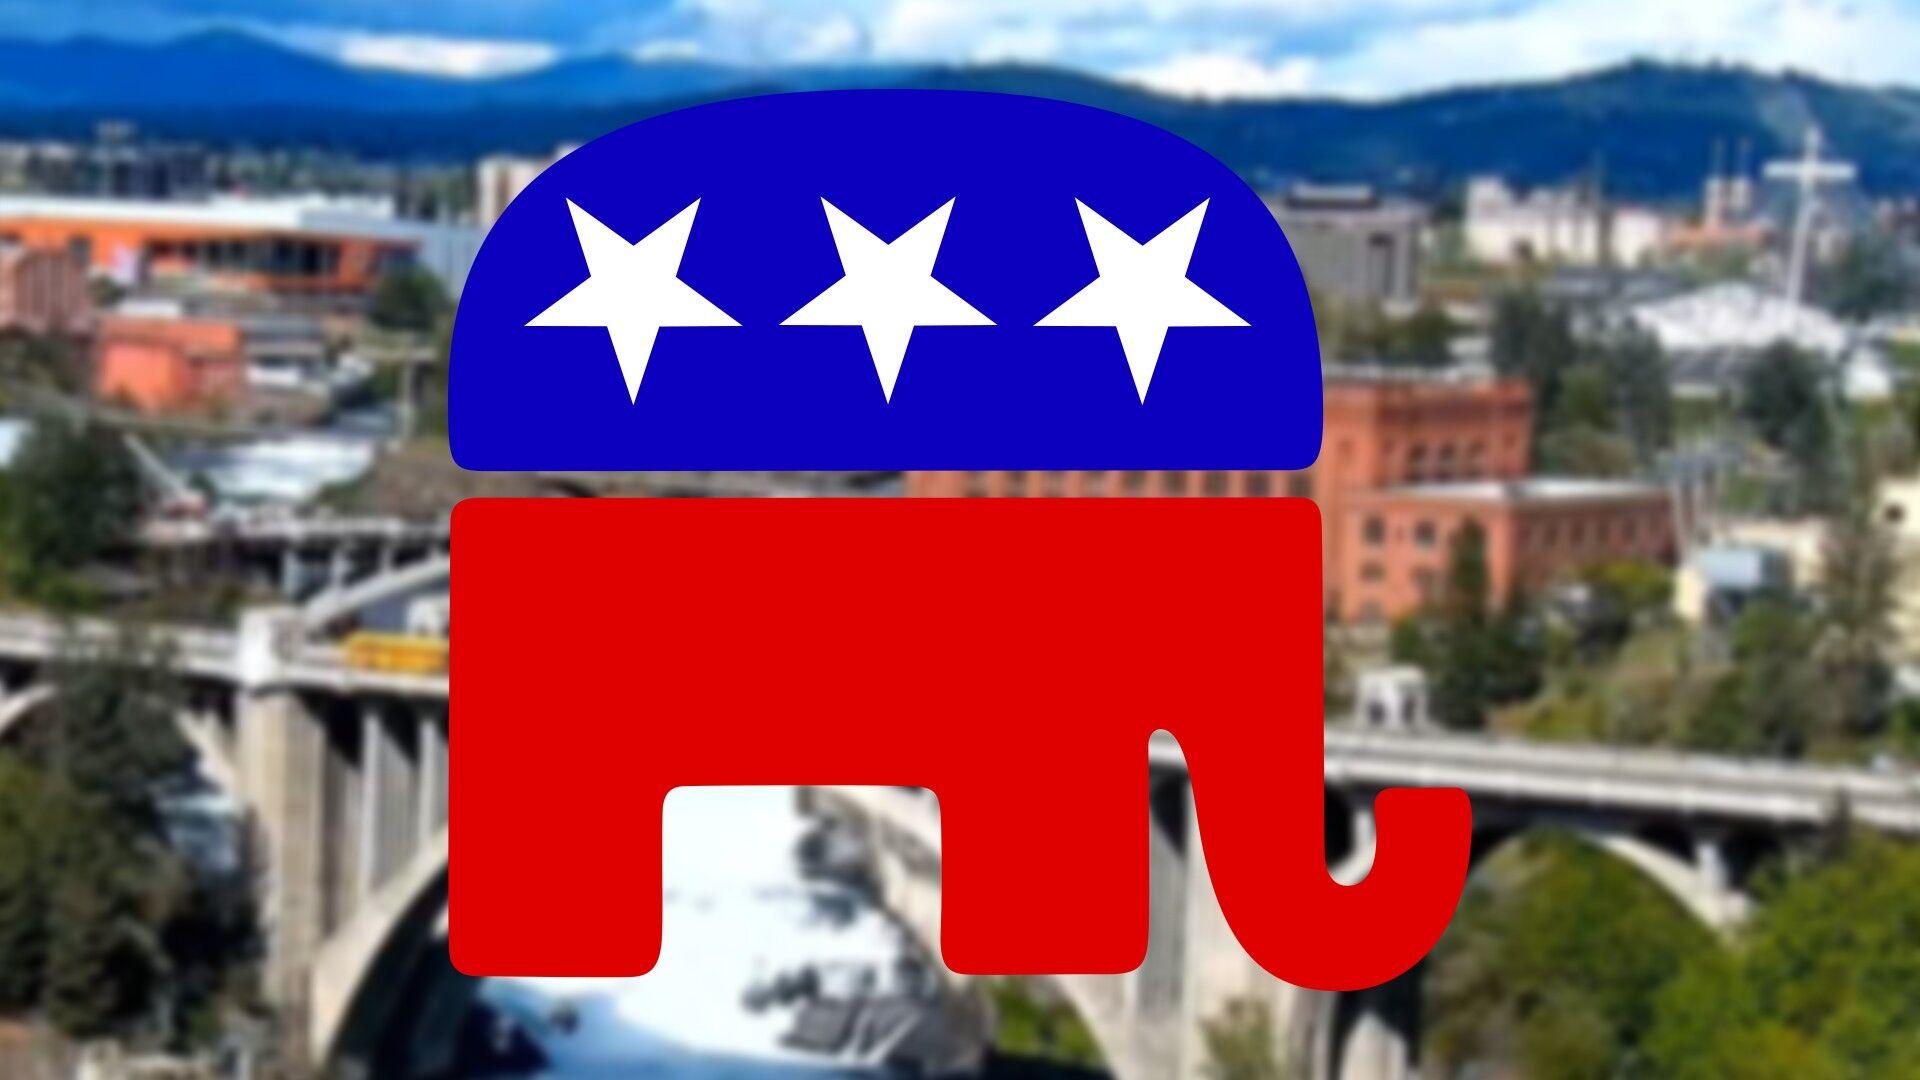 Several Republicans are leaving elected offices in eastern Washington, leaving room for new conservatives [Video]